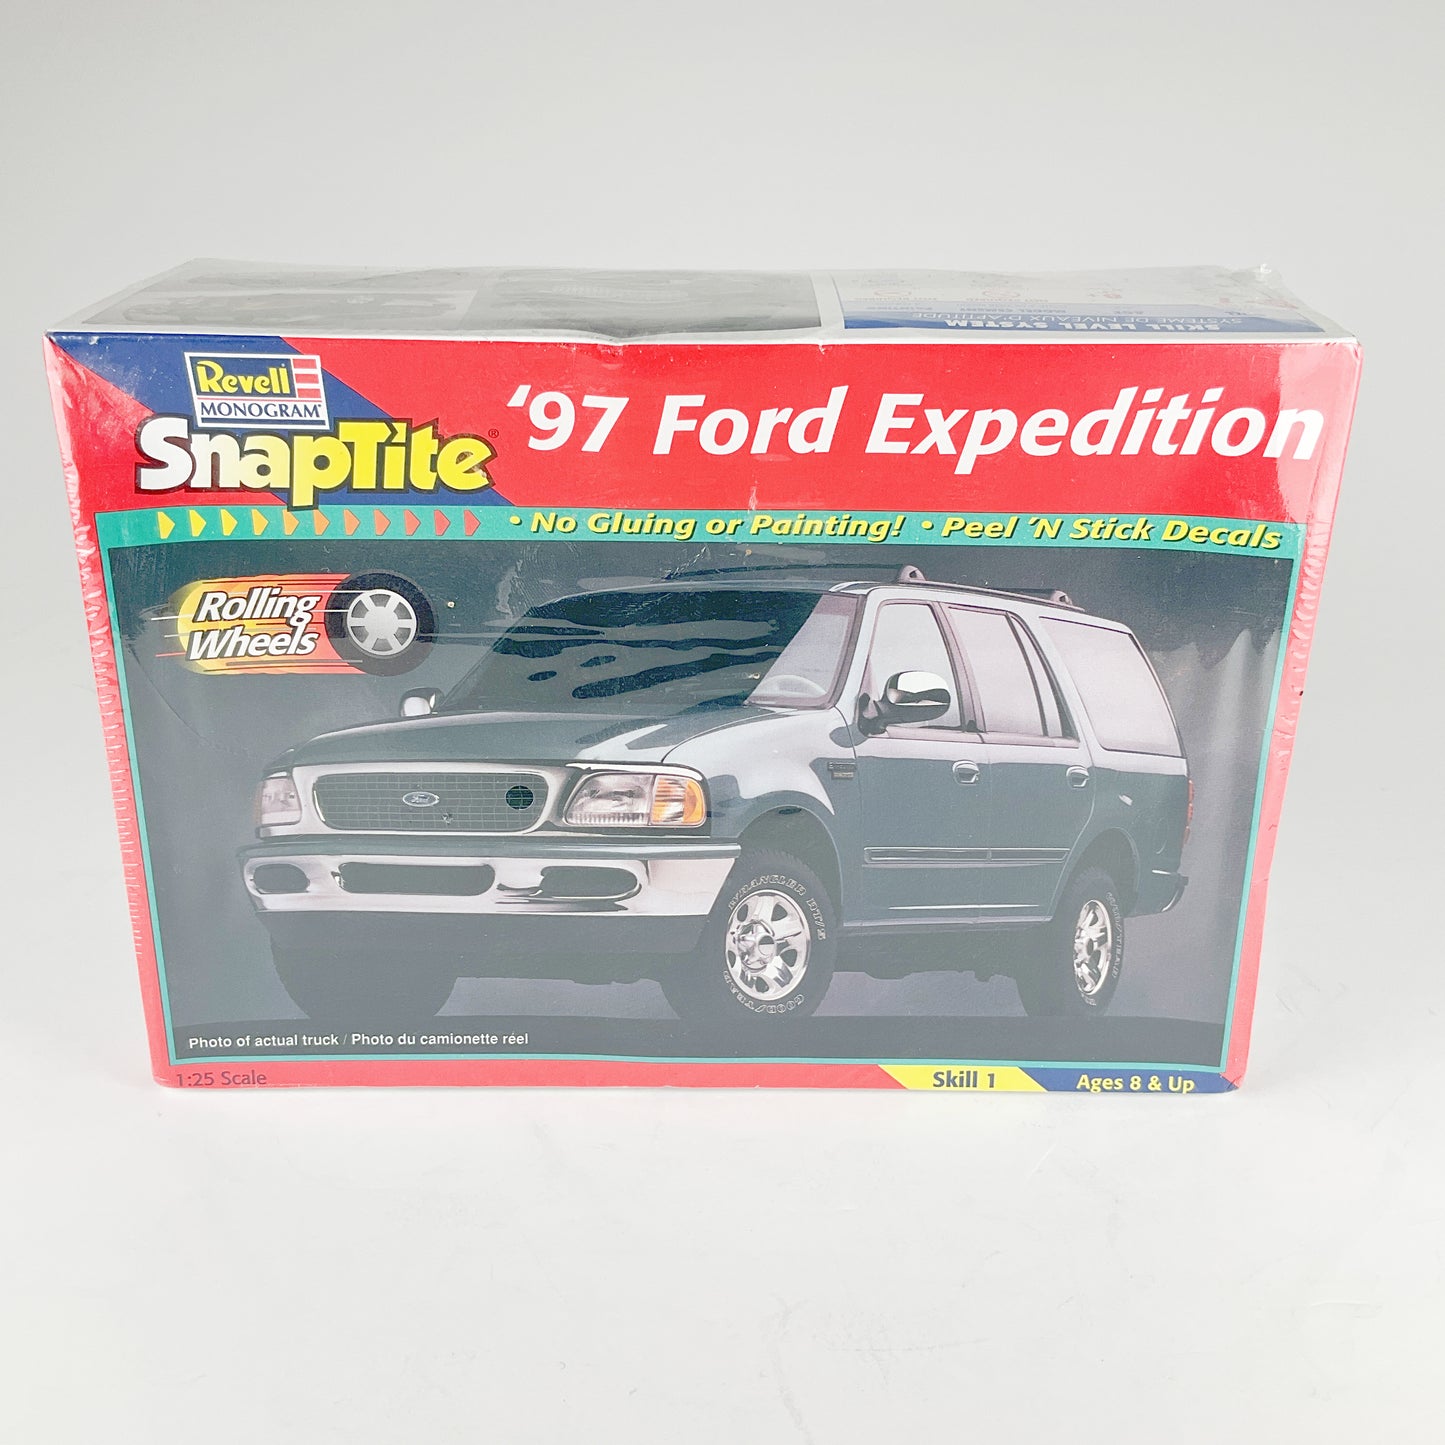 Revell Monogram - Snaptite 97 Ford Expedition